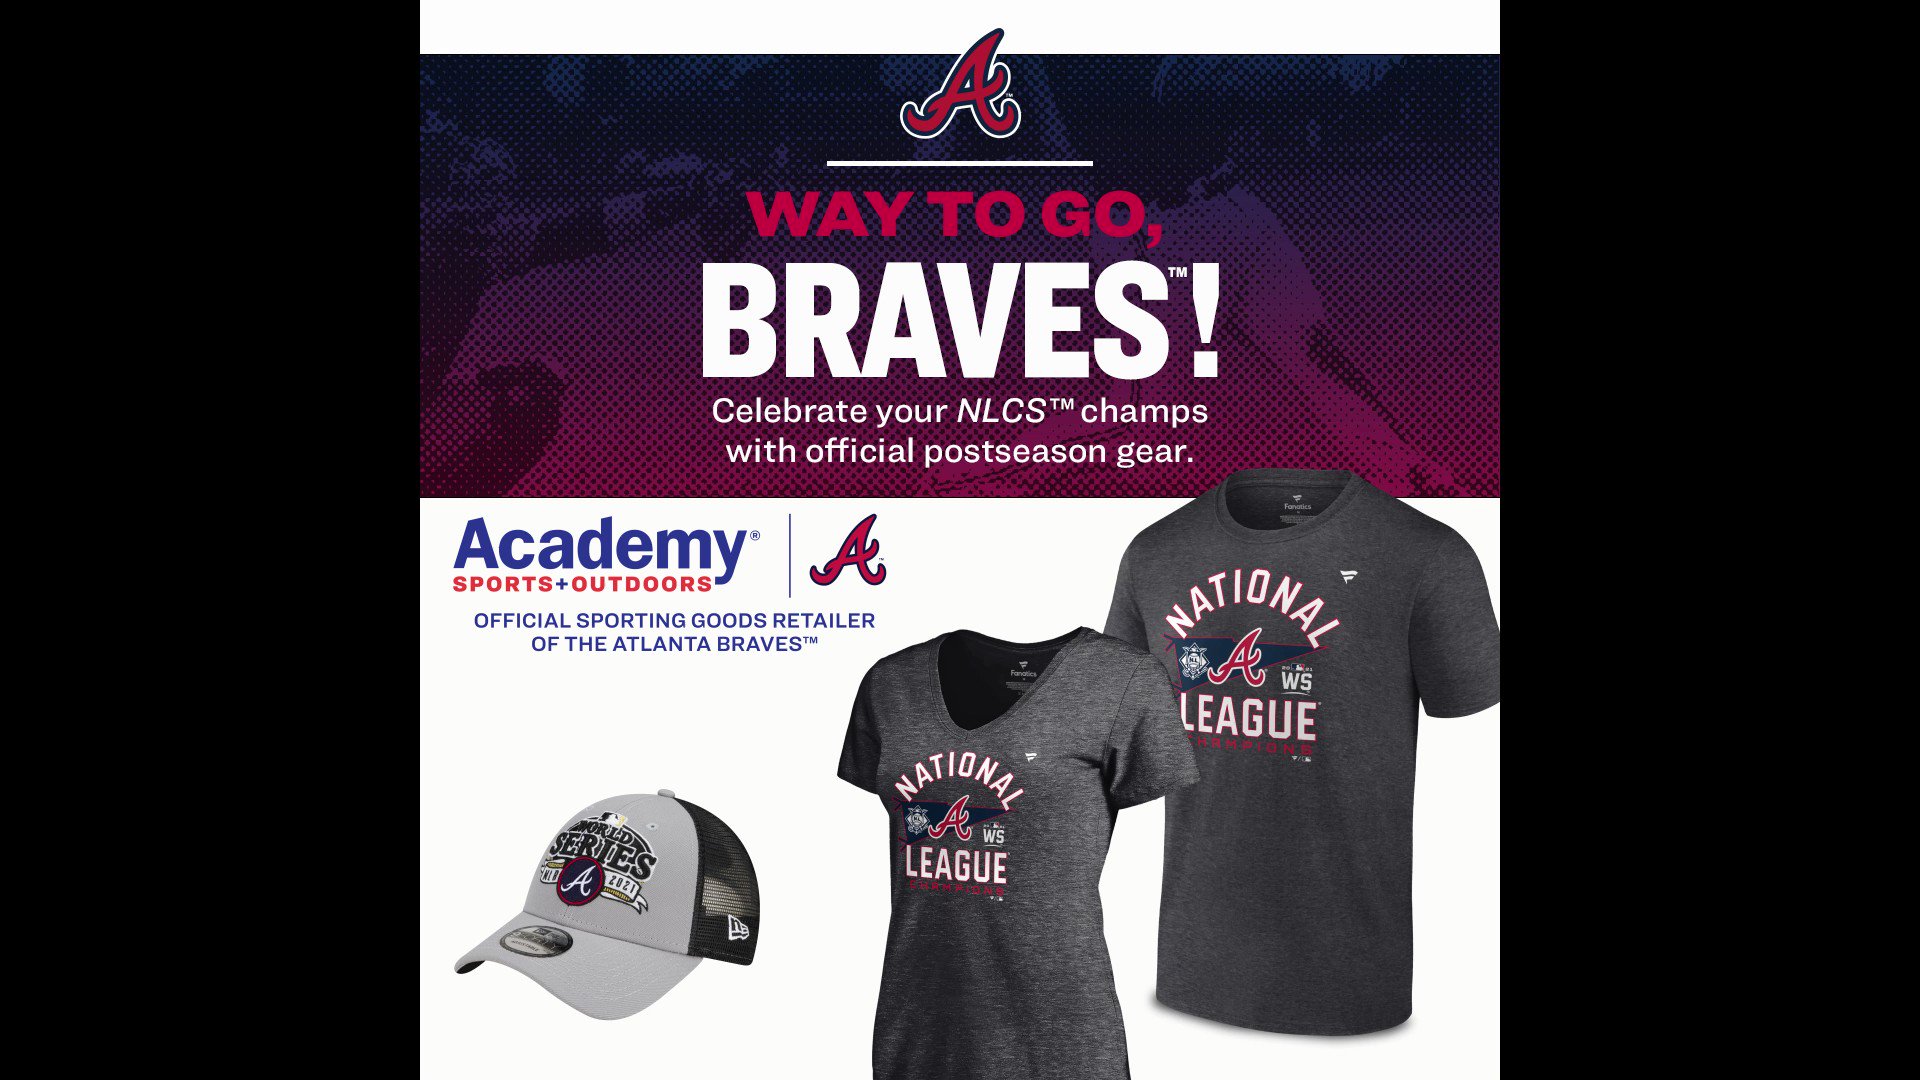 Academy Sports + Outdoors on Twitter: The Atlanta Braves are the